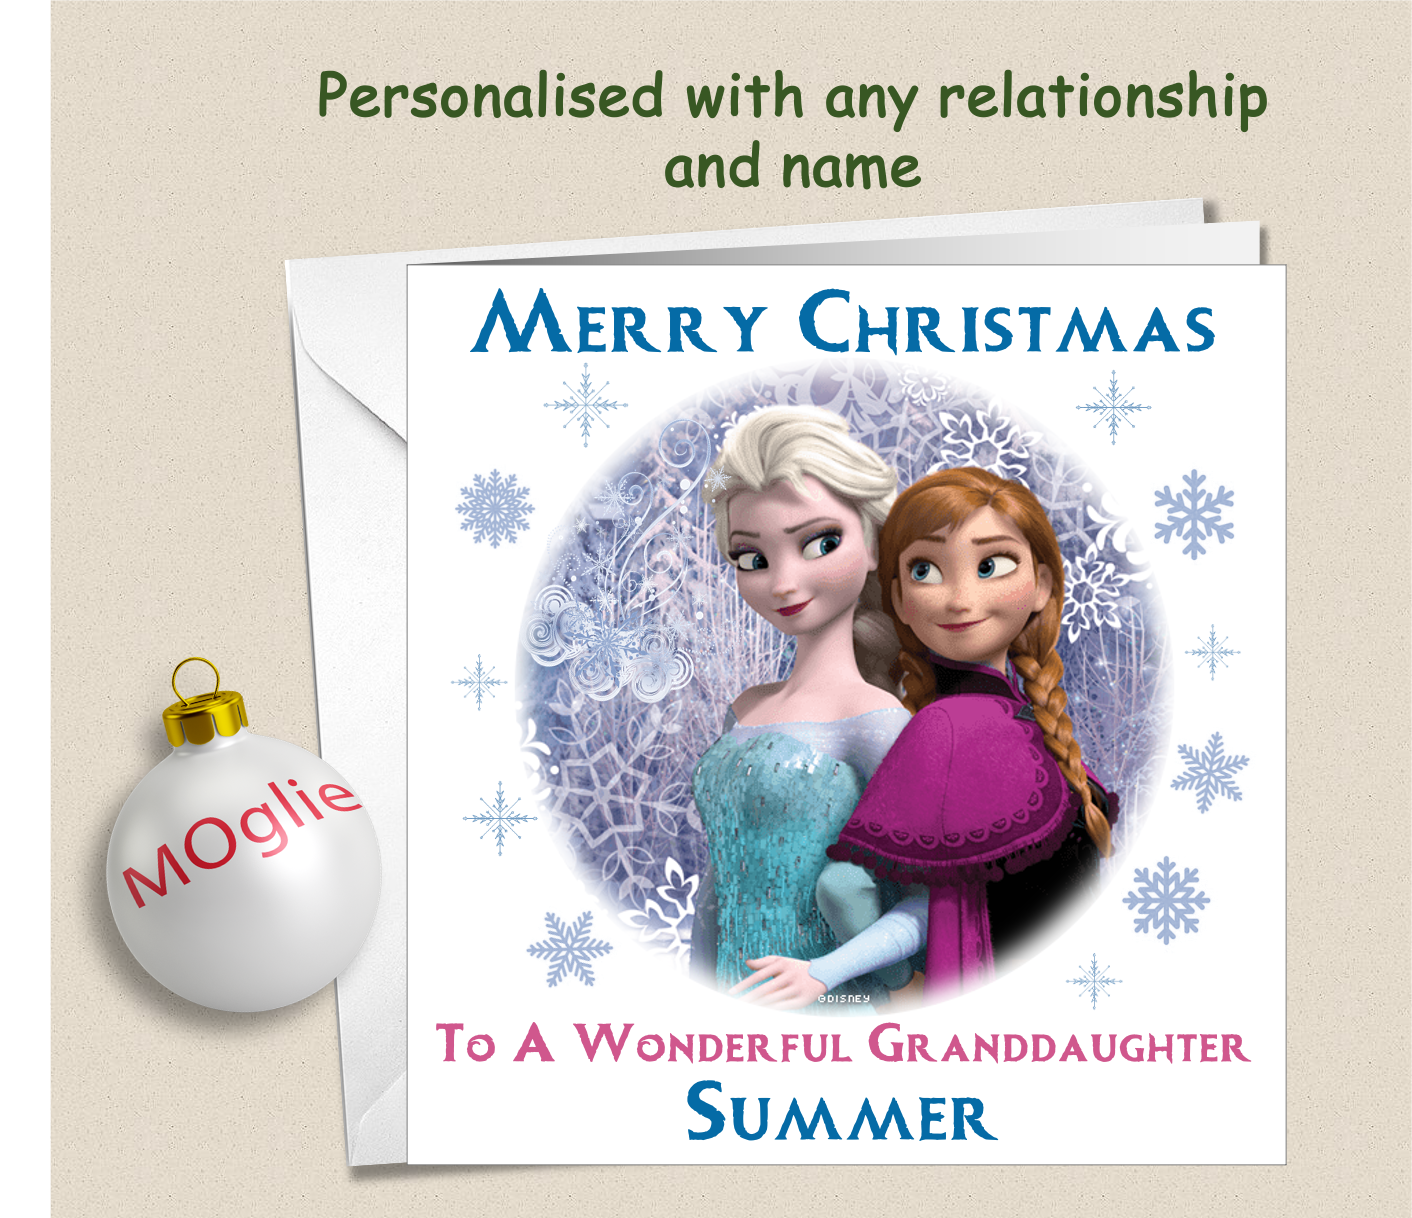 Personalised Frozen Elsa and Anna Christmas Card - FRZ2